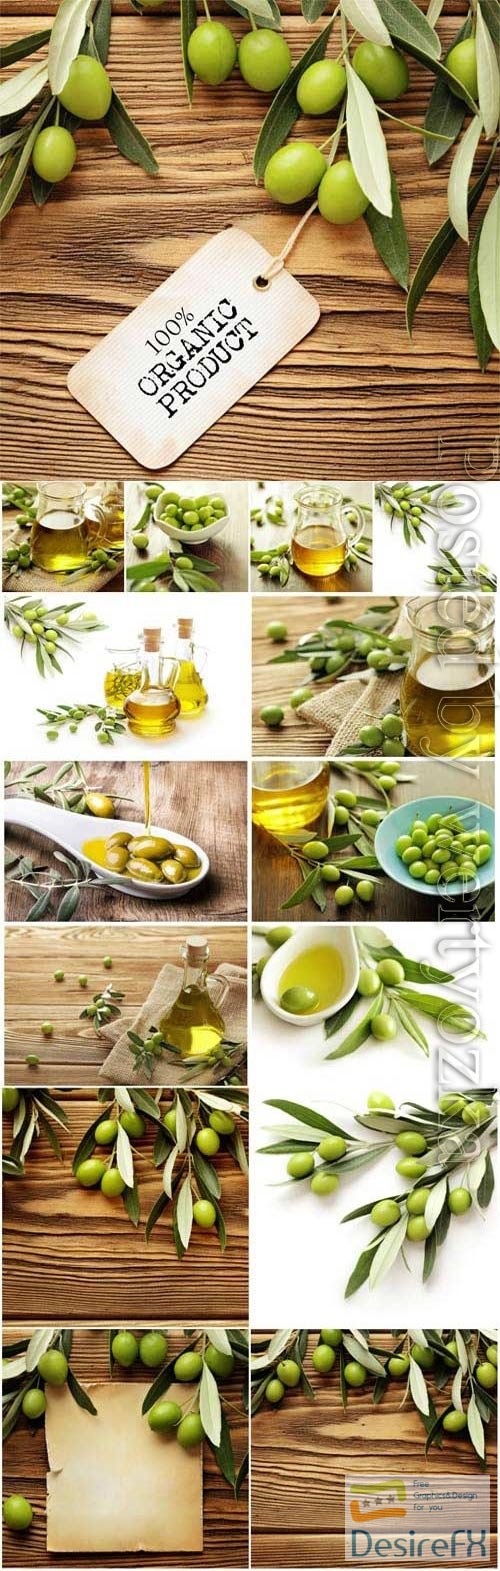 Olive sprigs, olives and olive oil stock photo